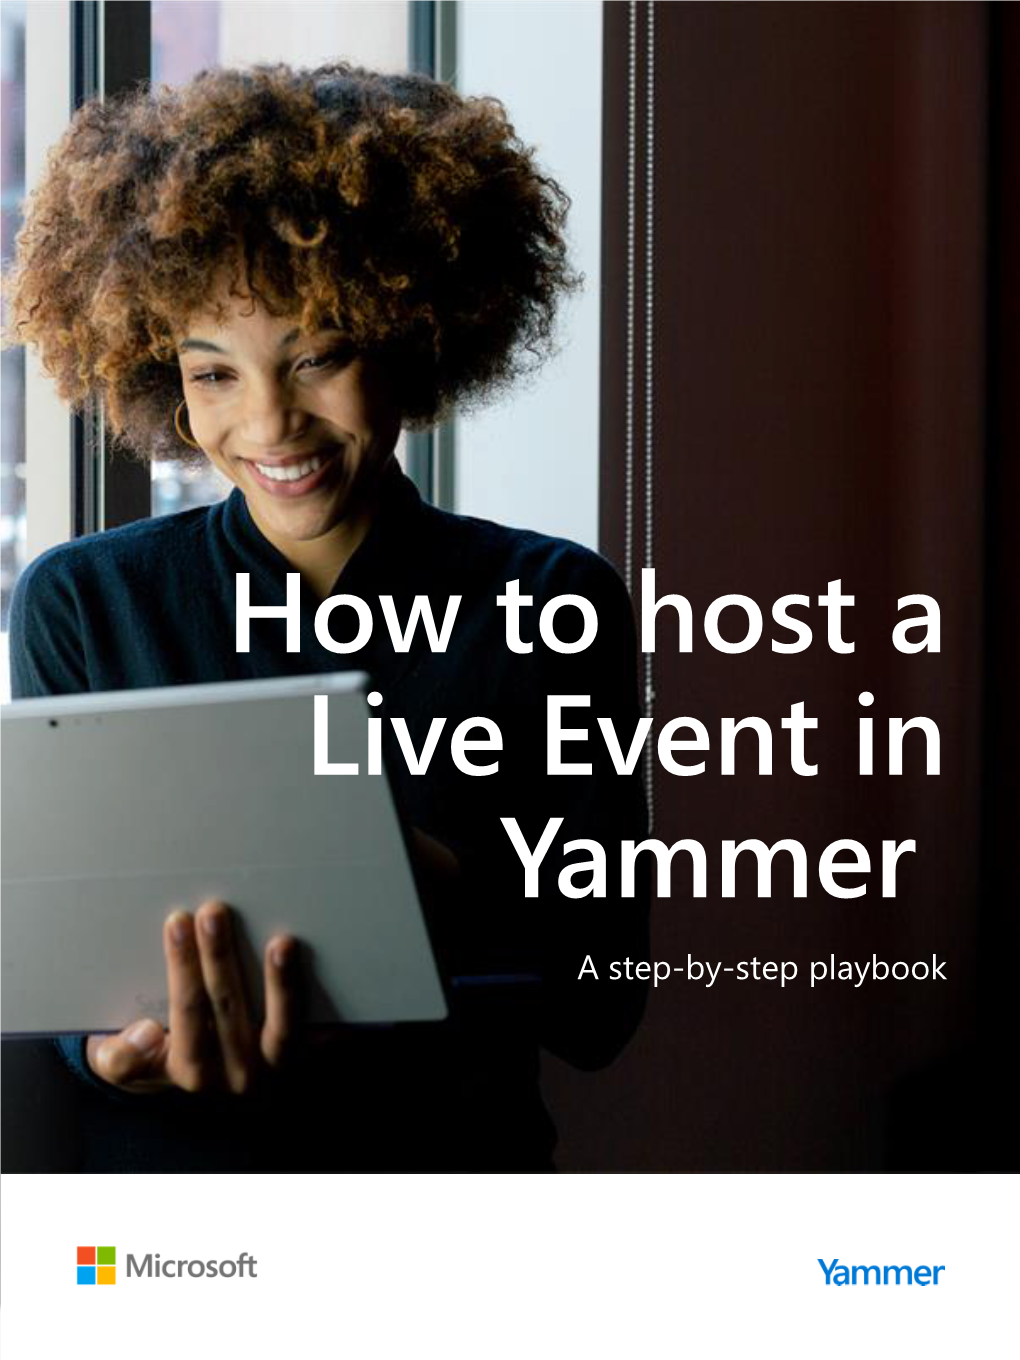 How to Host a Live Event in Yammer a Step-By-Step Playbook Drive Engagement with Live Events in Yammer